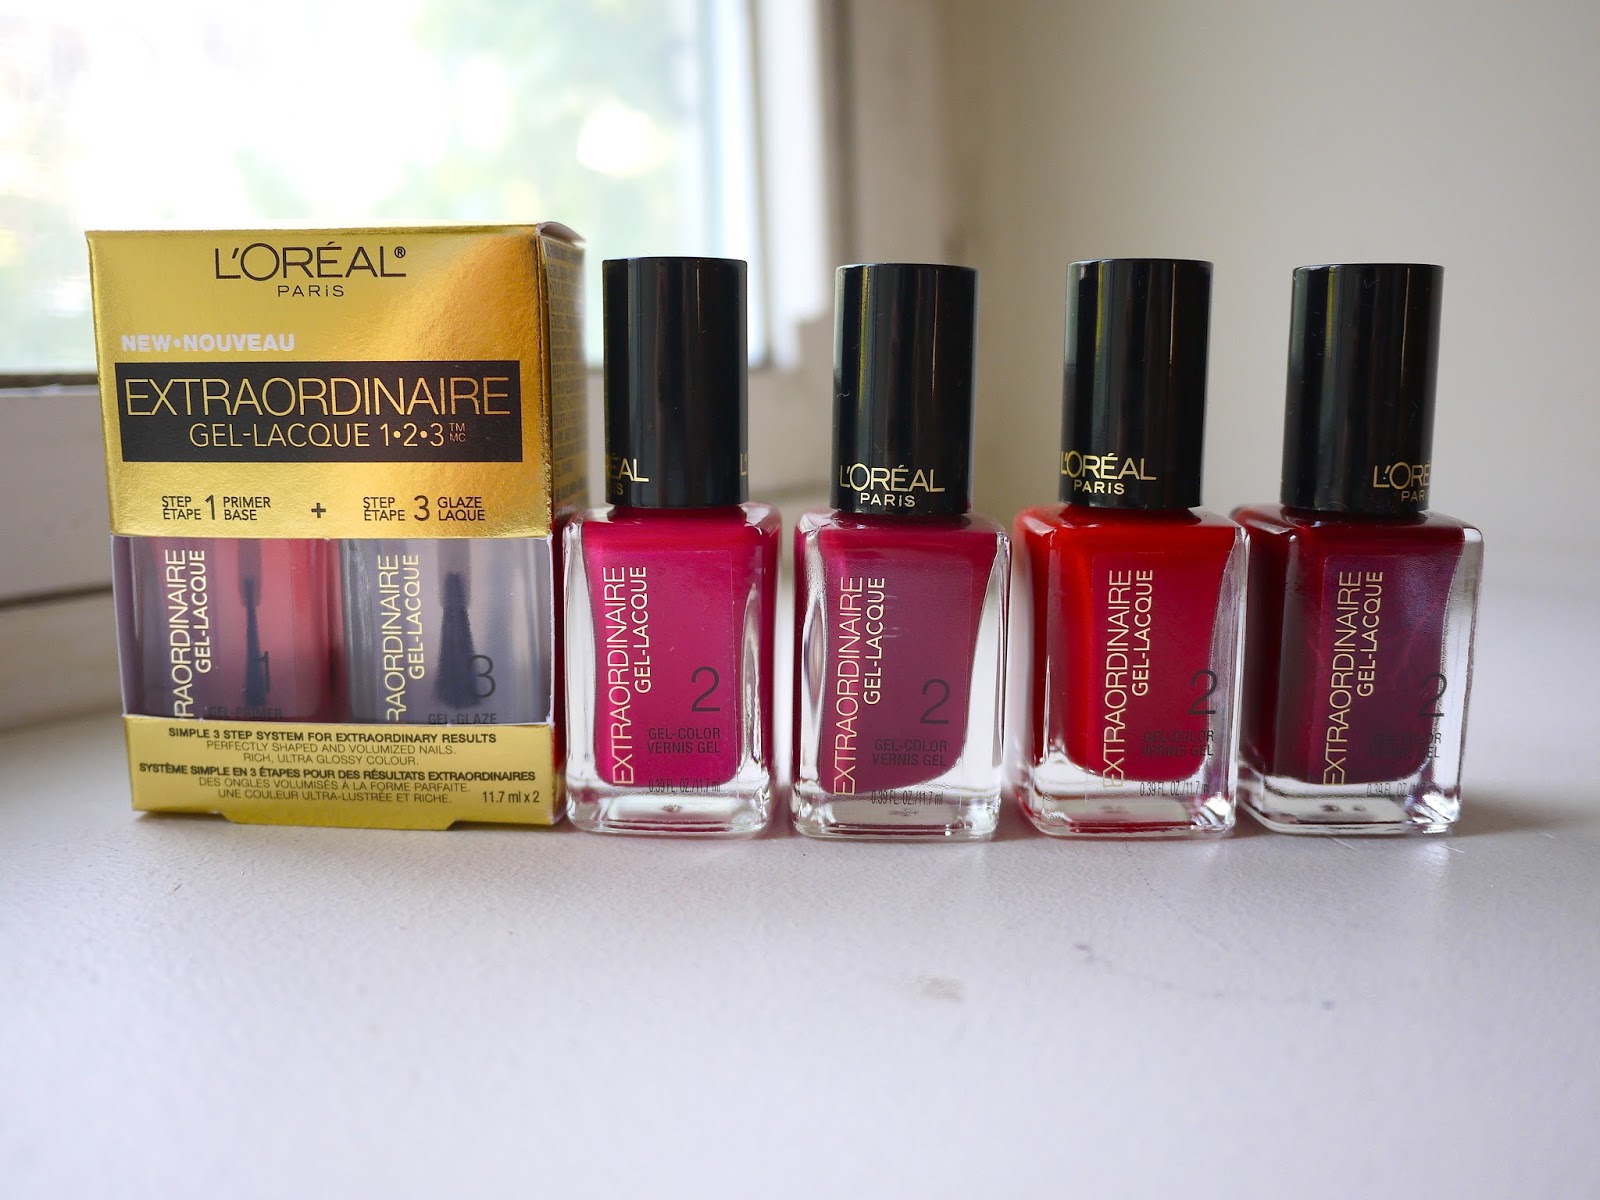 l'oreal extraordinaire gel-lacque 1-2-3 primer and glaze kit review swatch